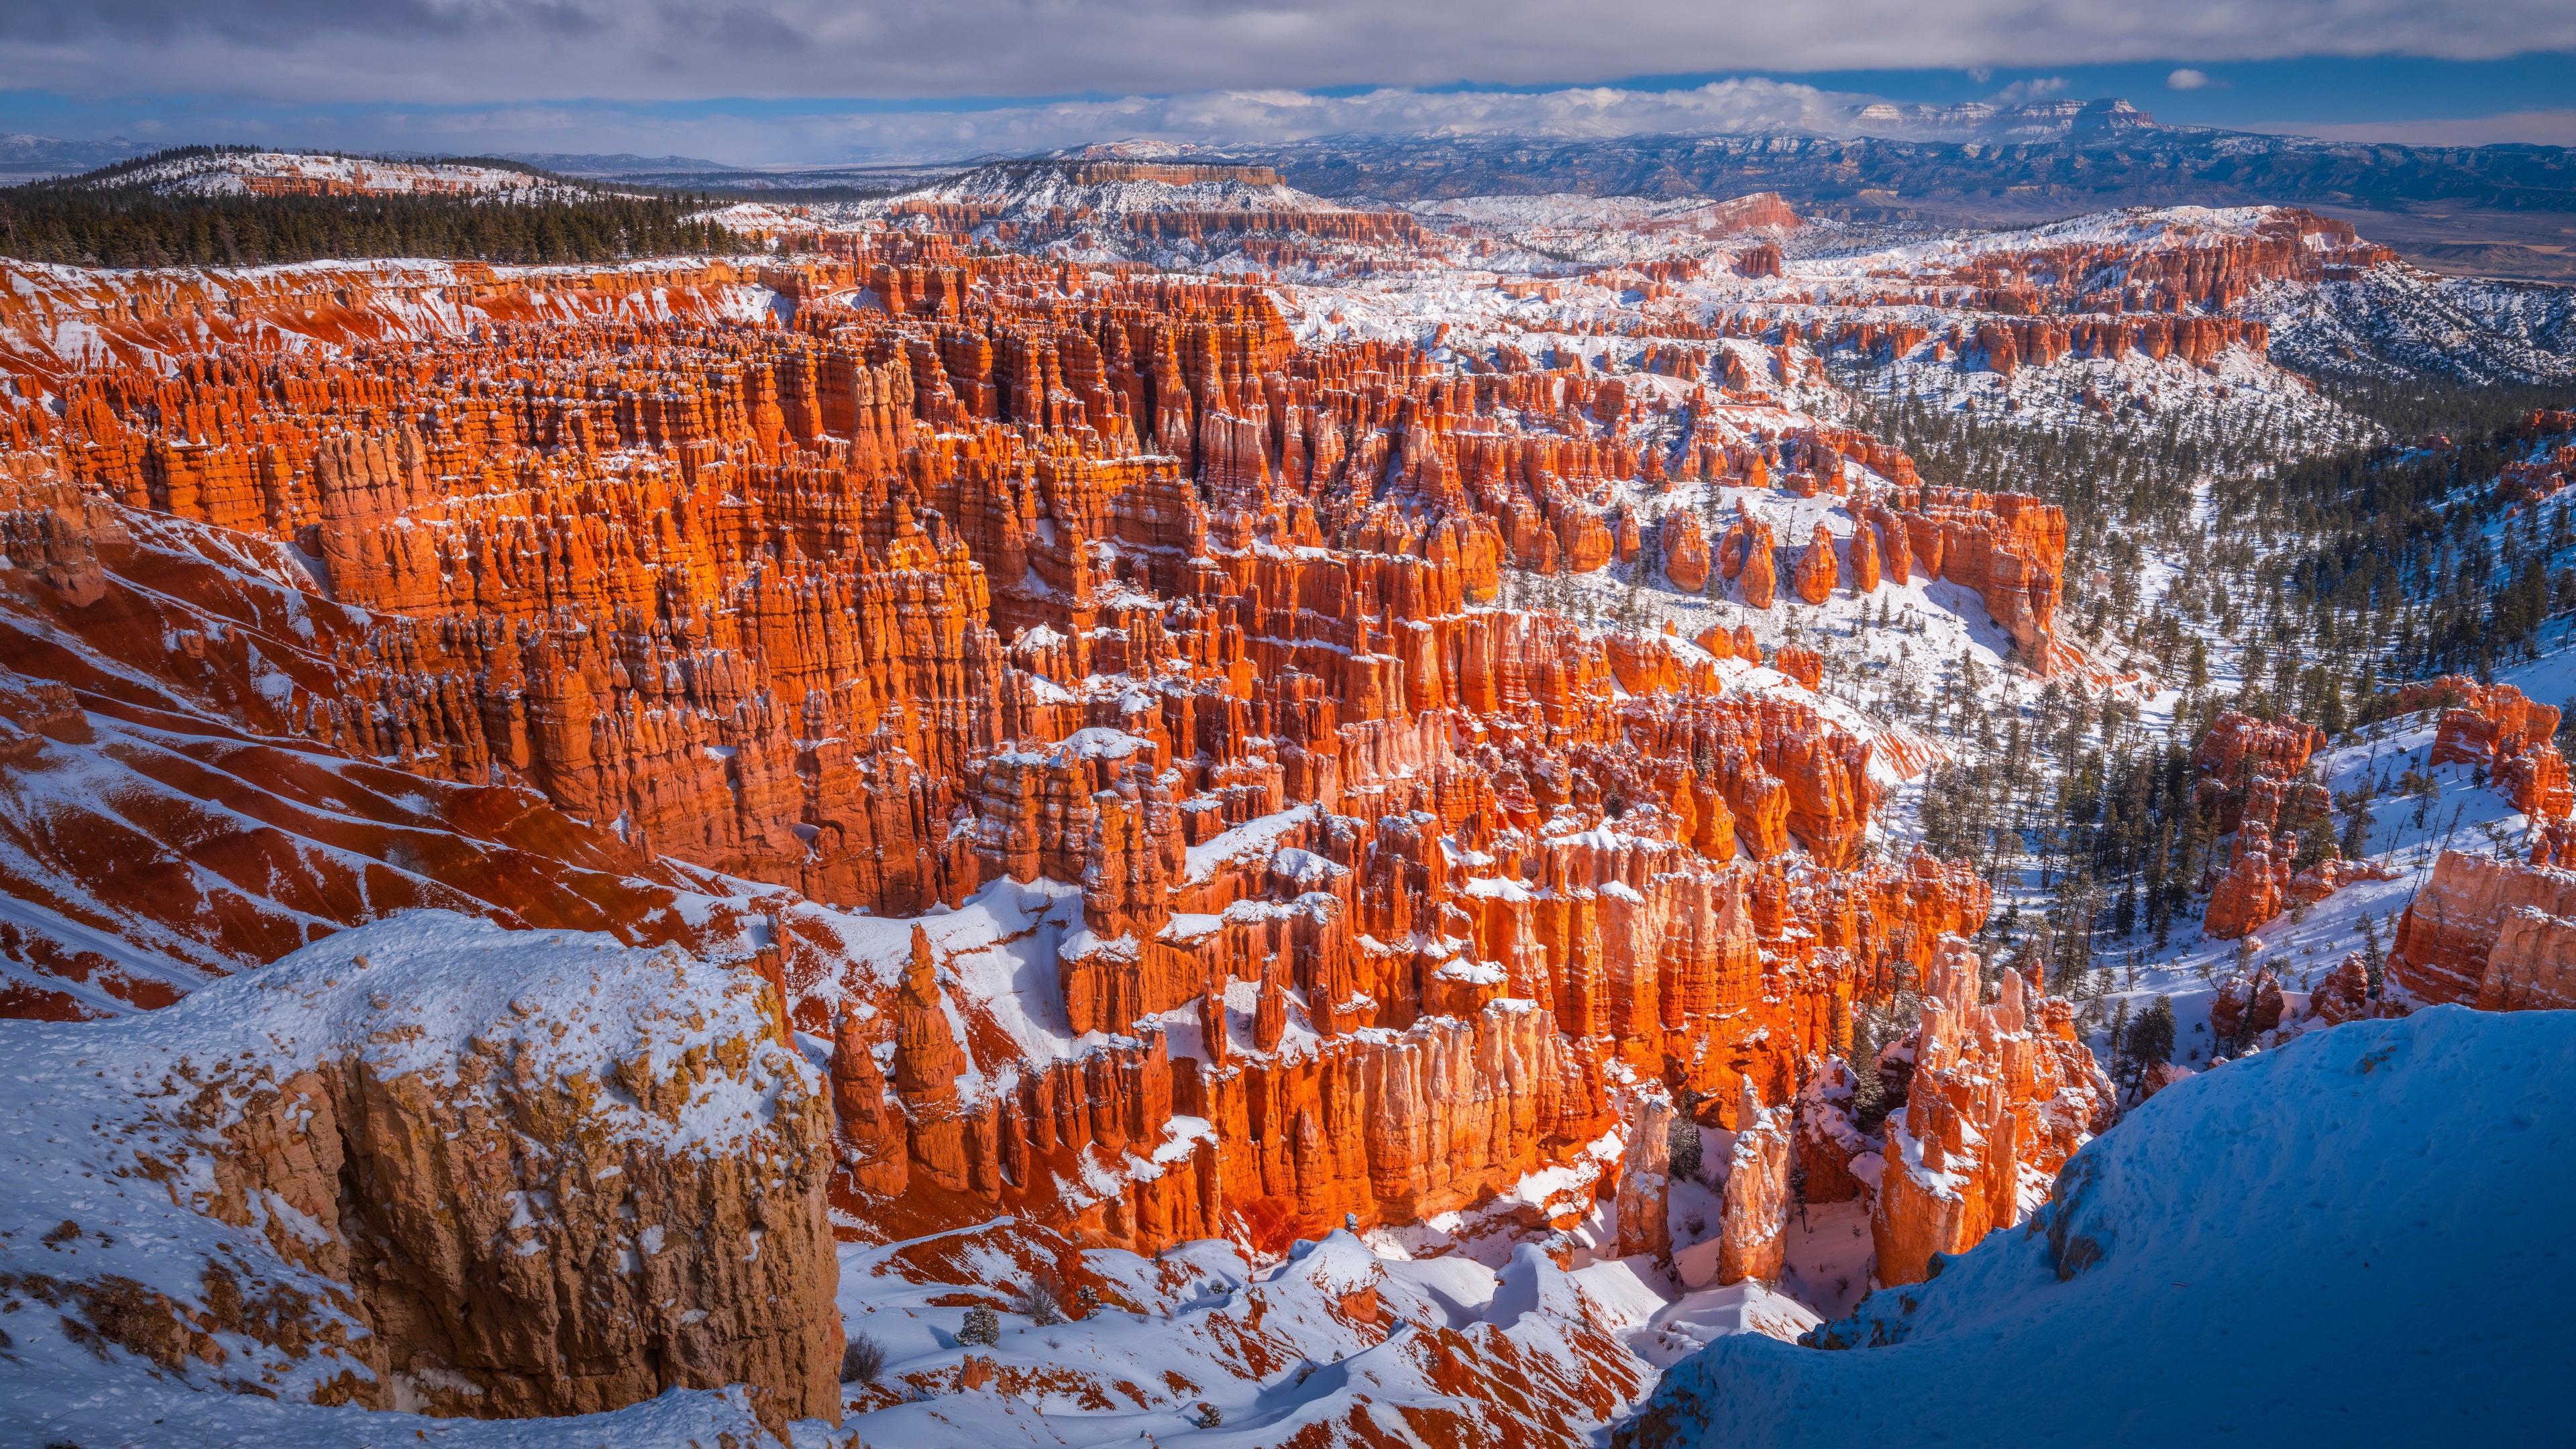 General 3840x2160 landscape nature winter snow USA mountains rock formation Grand Canyon desert sky clouds valley